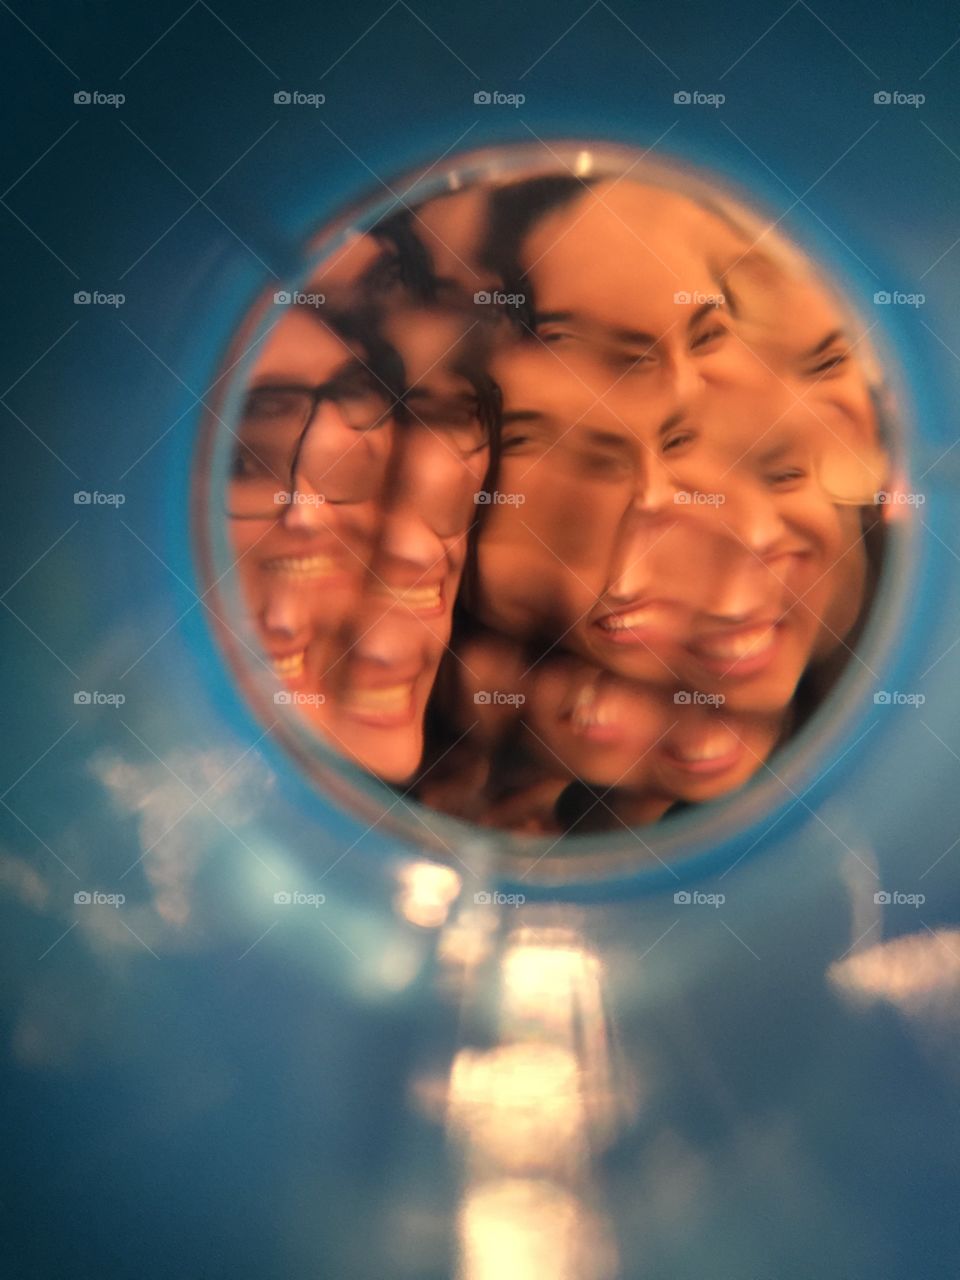 Took this picture at a kids birthday party. I took the photo through the eyehole on an toy kaleidoscope. 